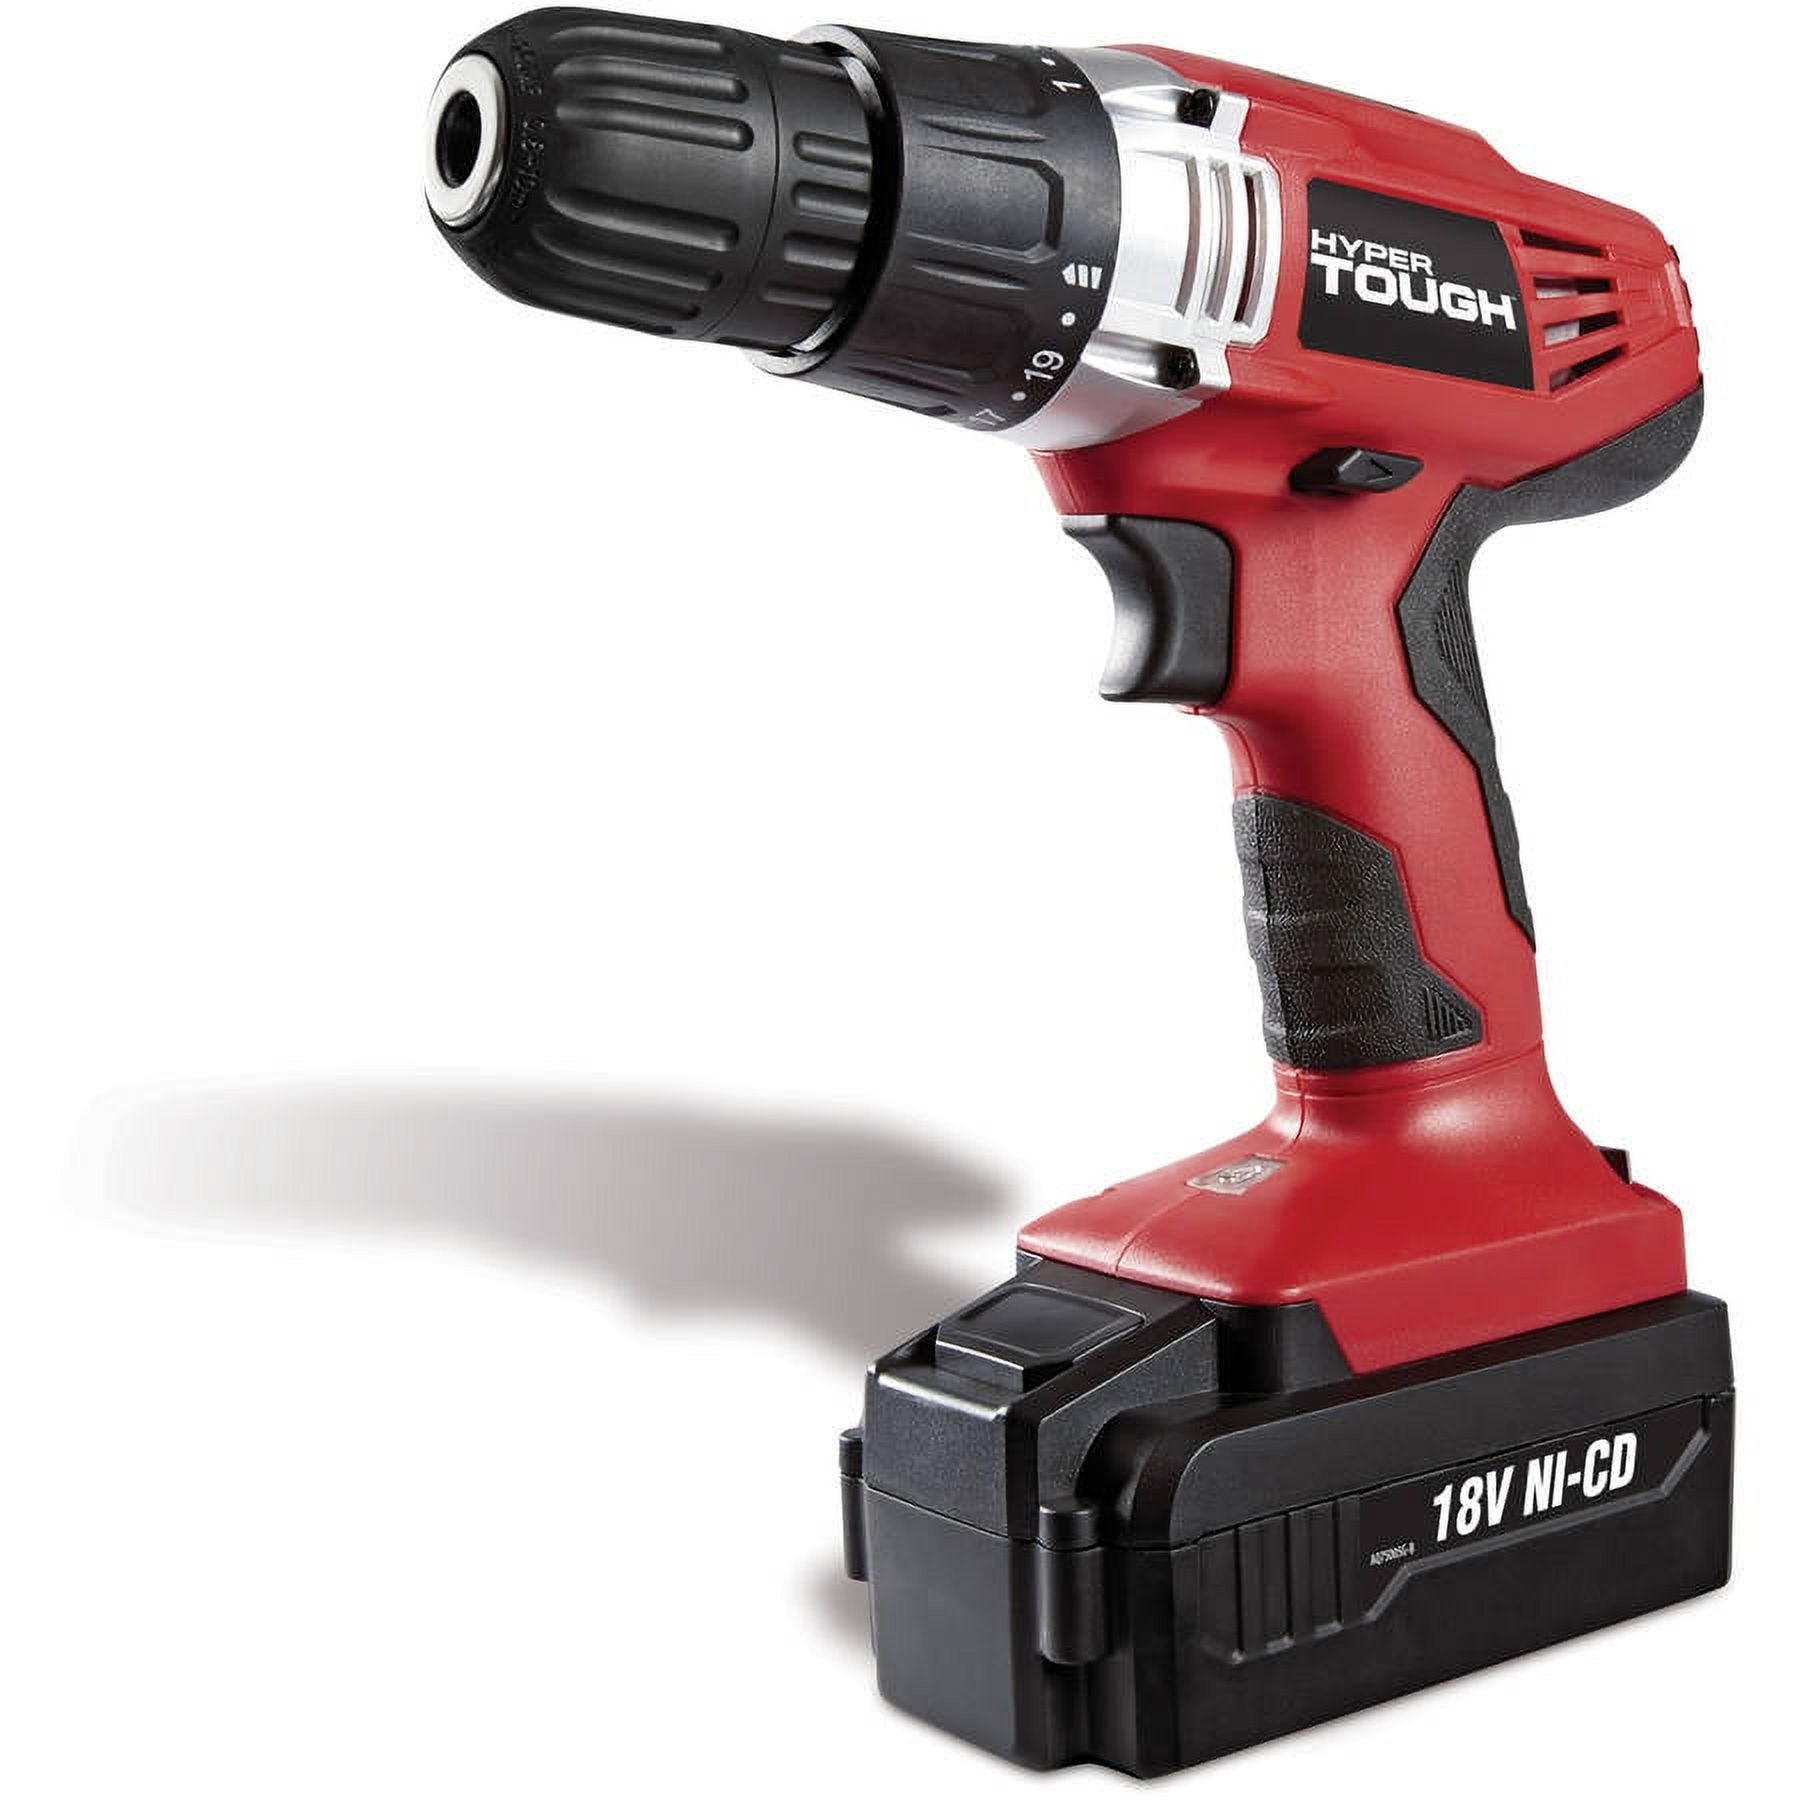 Hyper Tough 18V Cordless Drill, 3/8 inch Chuck, Variable Speed, with 1.2Ah Nickel Cadmium Battery, Charger, Bit Holder & LED Light - image 1 of 8